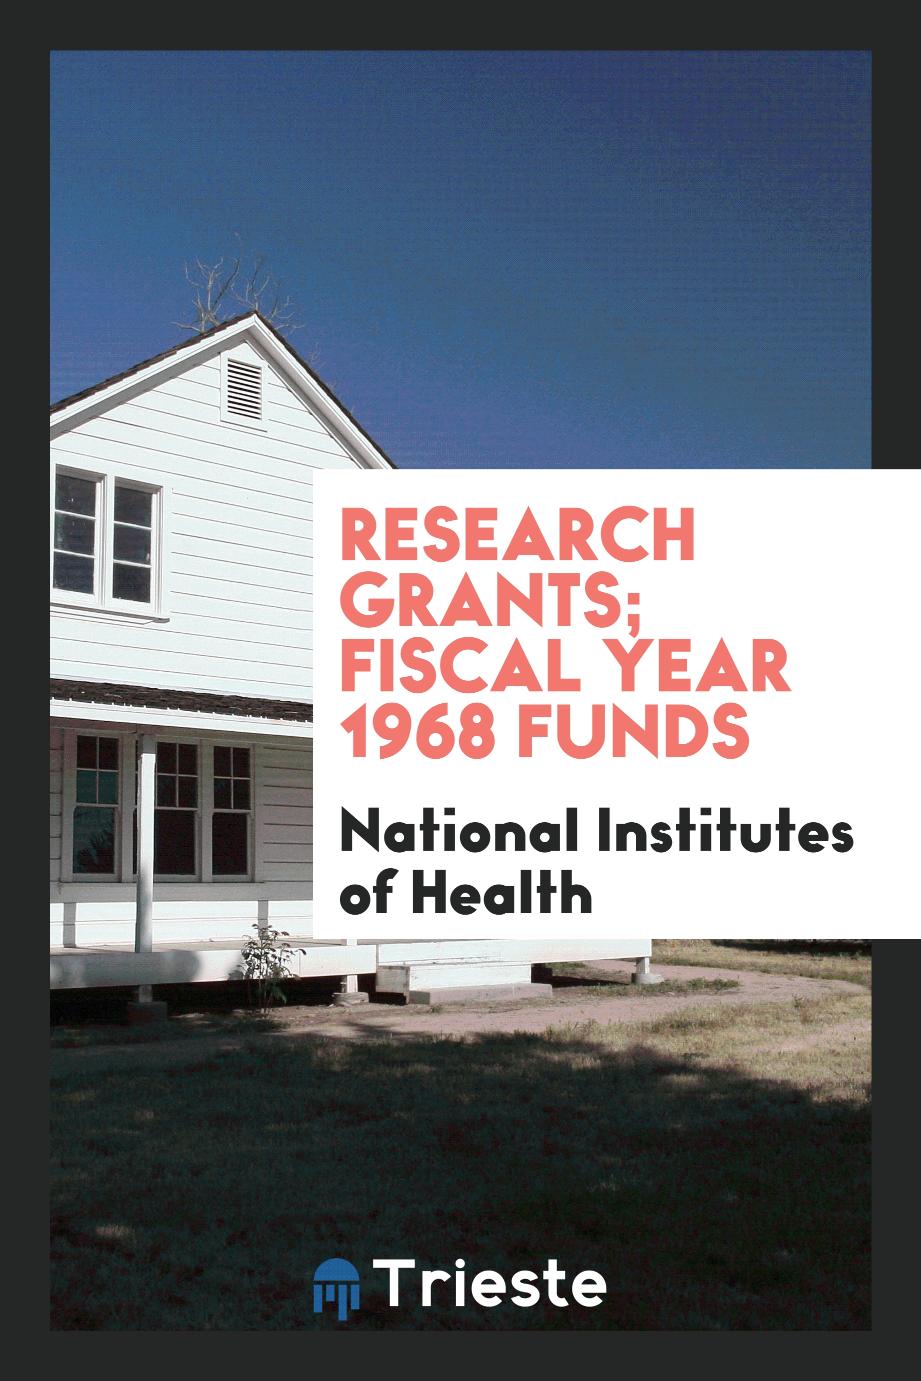 Research grants; Fiscal Year 1968 funds